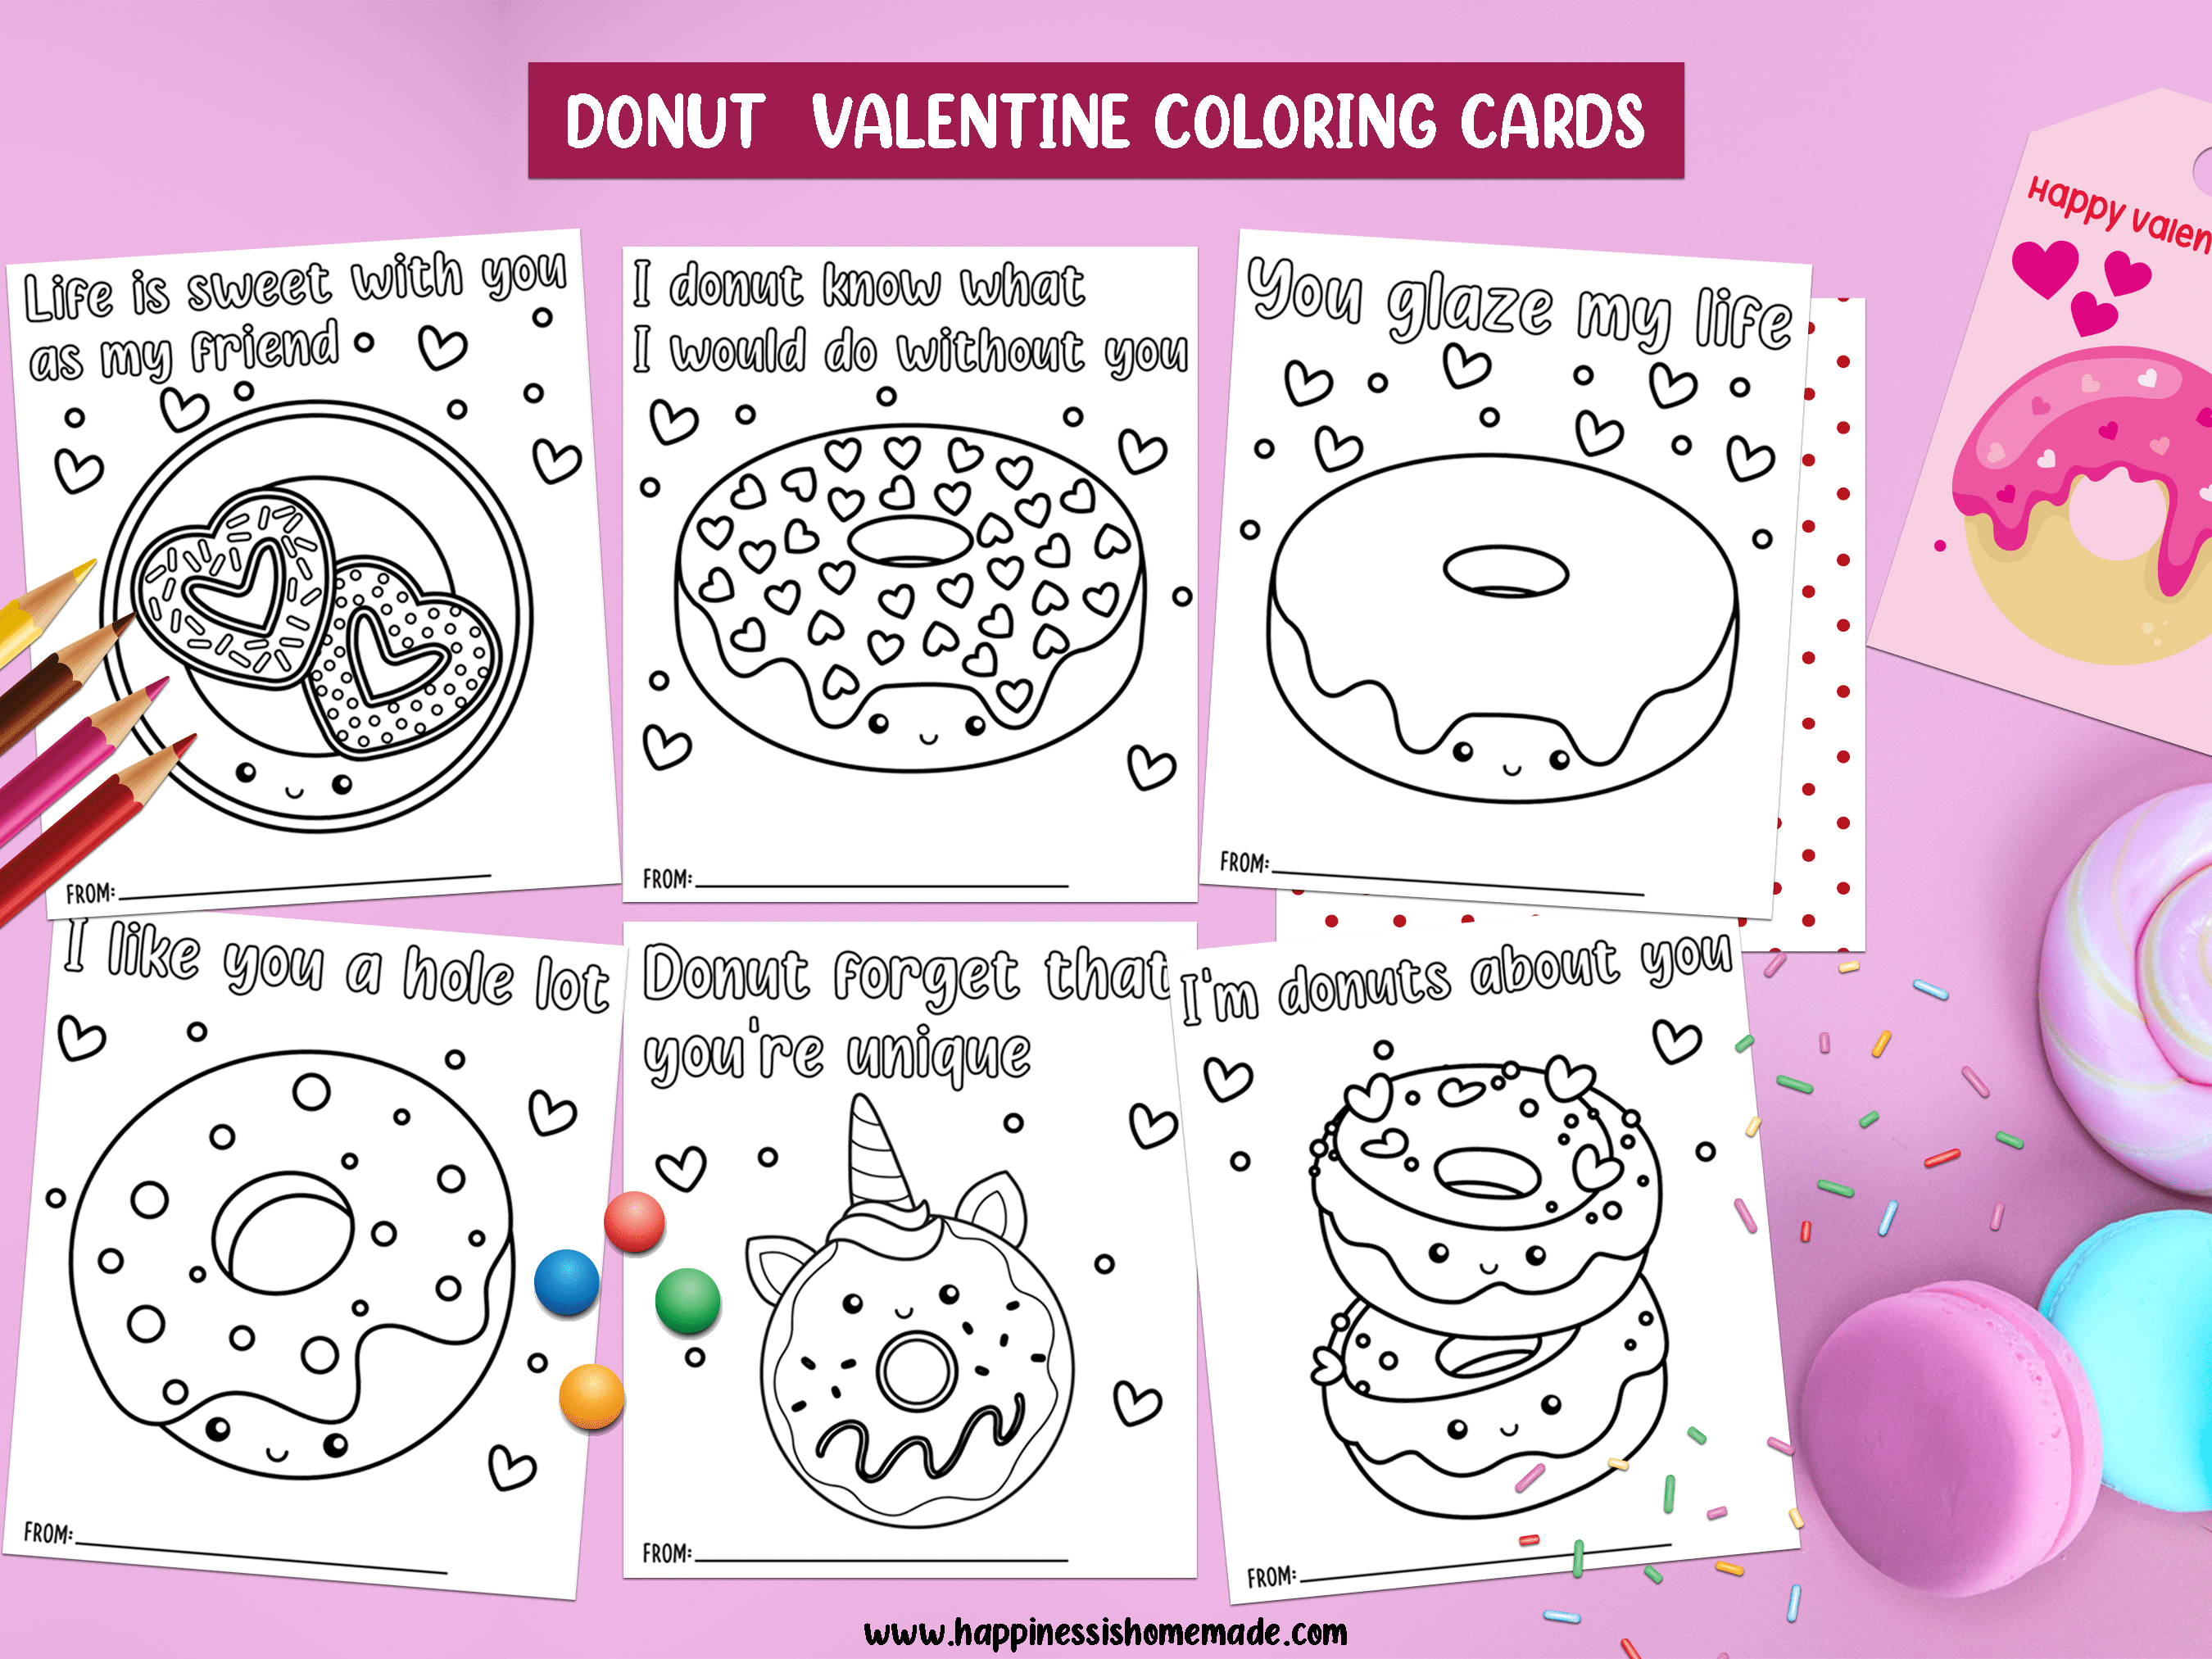 donut valentine cards on a purple background with colored pencils and sprinkles